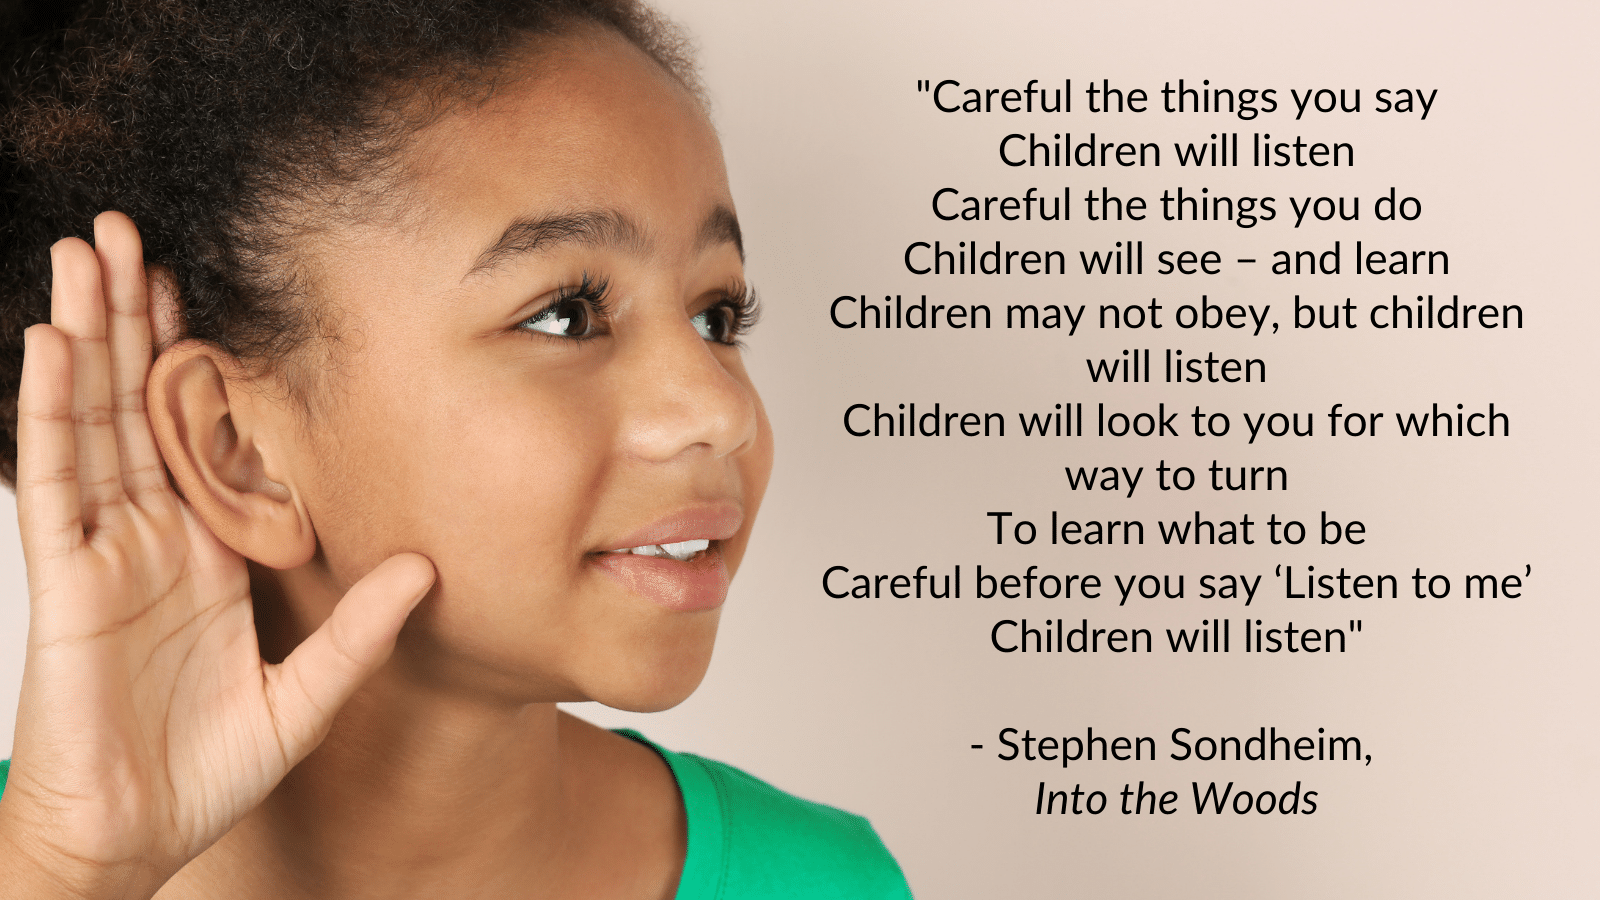 "Careful the things you say Children will listen Careful the things you do Children will see – and learn Children may not obey, but children will listen Children will look to you for which way to turn To learn what to be Careful before you say ‘Listen to me’ Children will listen" - Stephen Sondheim, Into the Woods